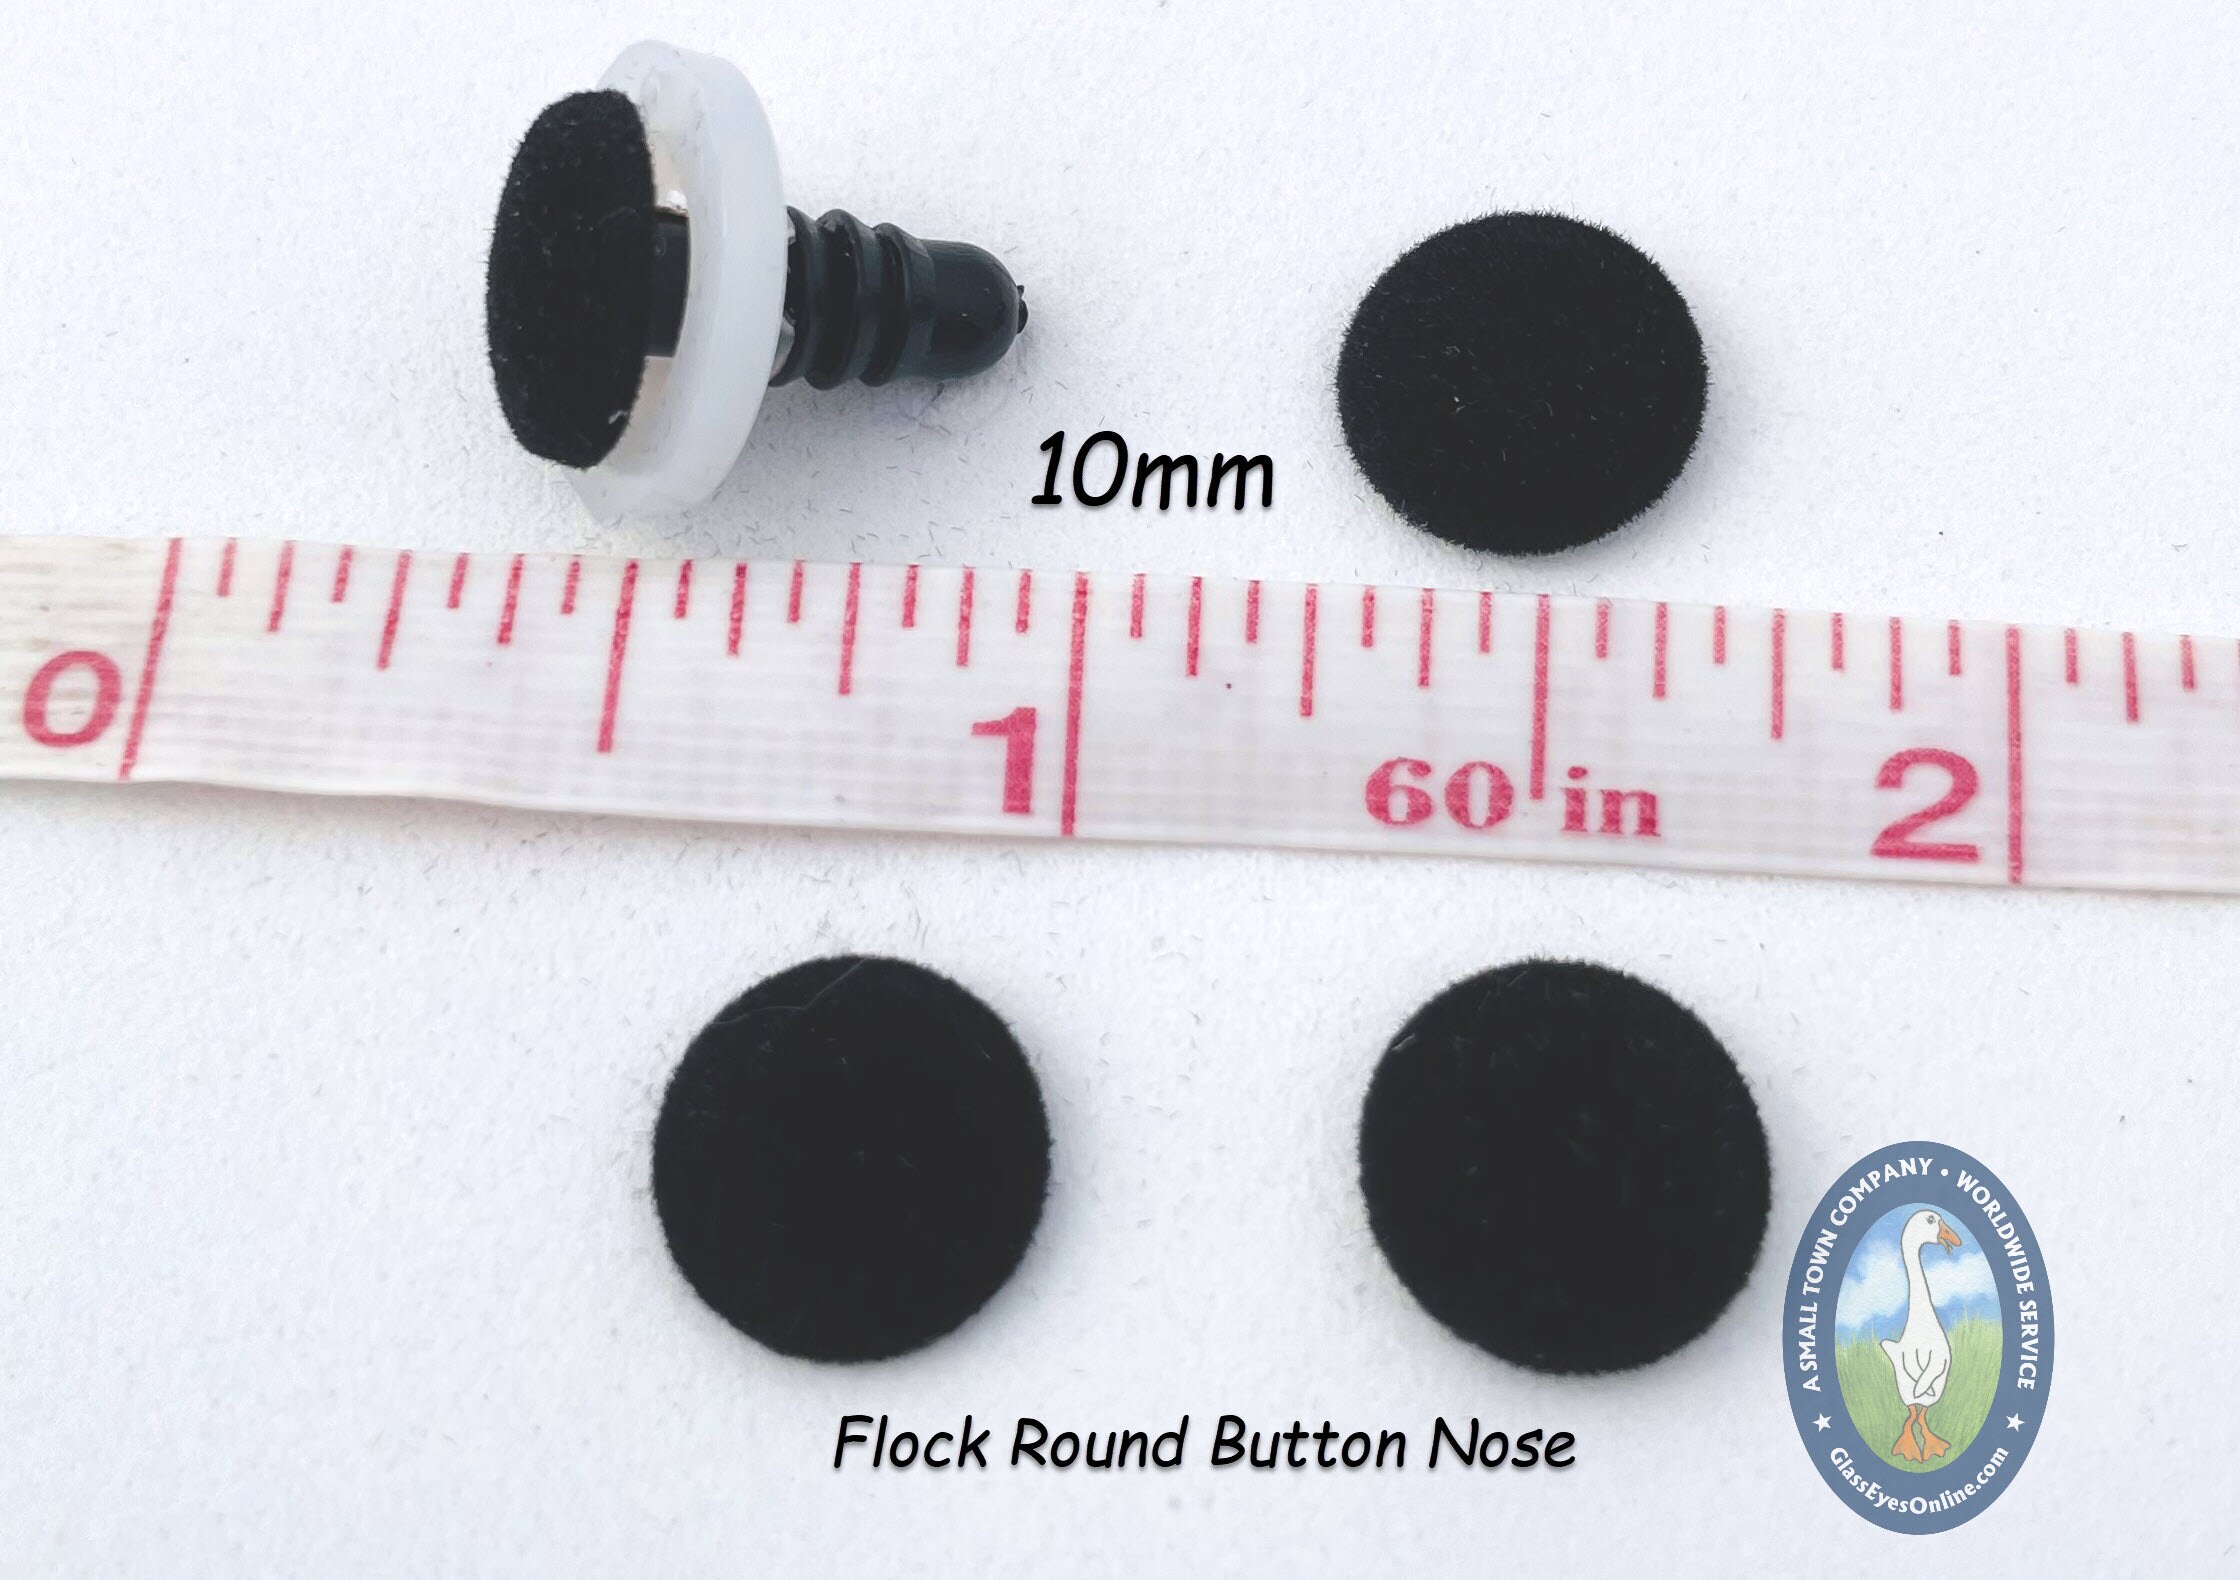 12 Flock Round Button Safety Noses Crochet Sewing Needle Felting Crafts  FRBN